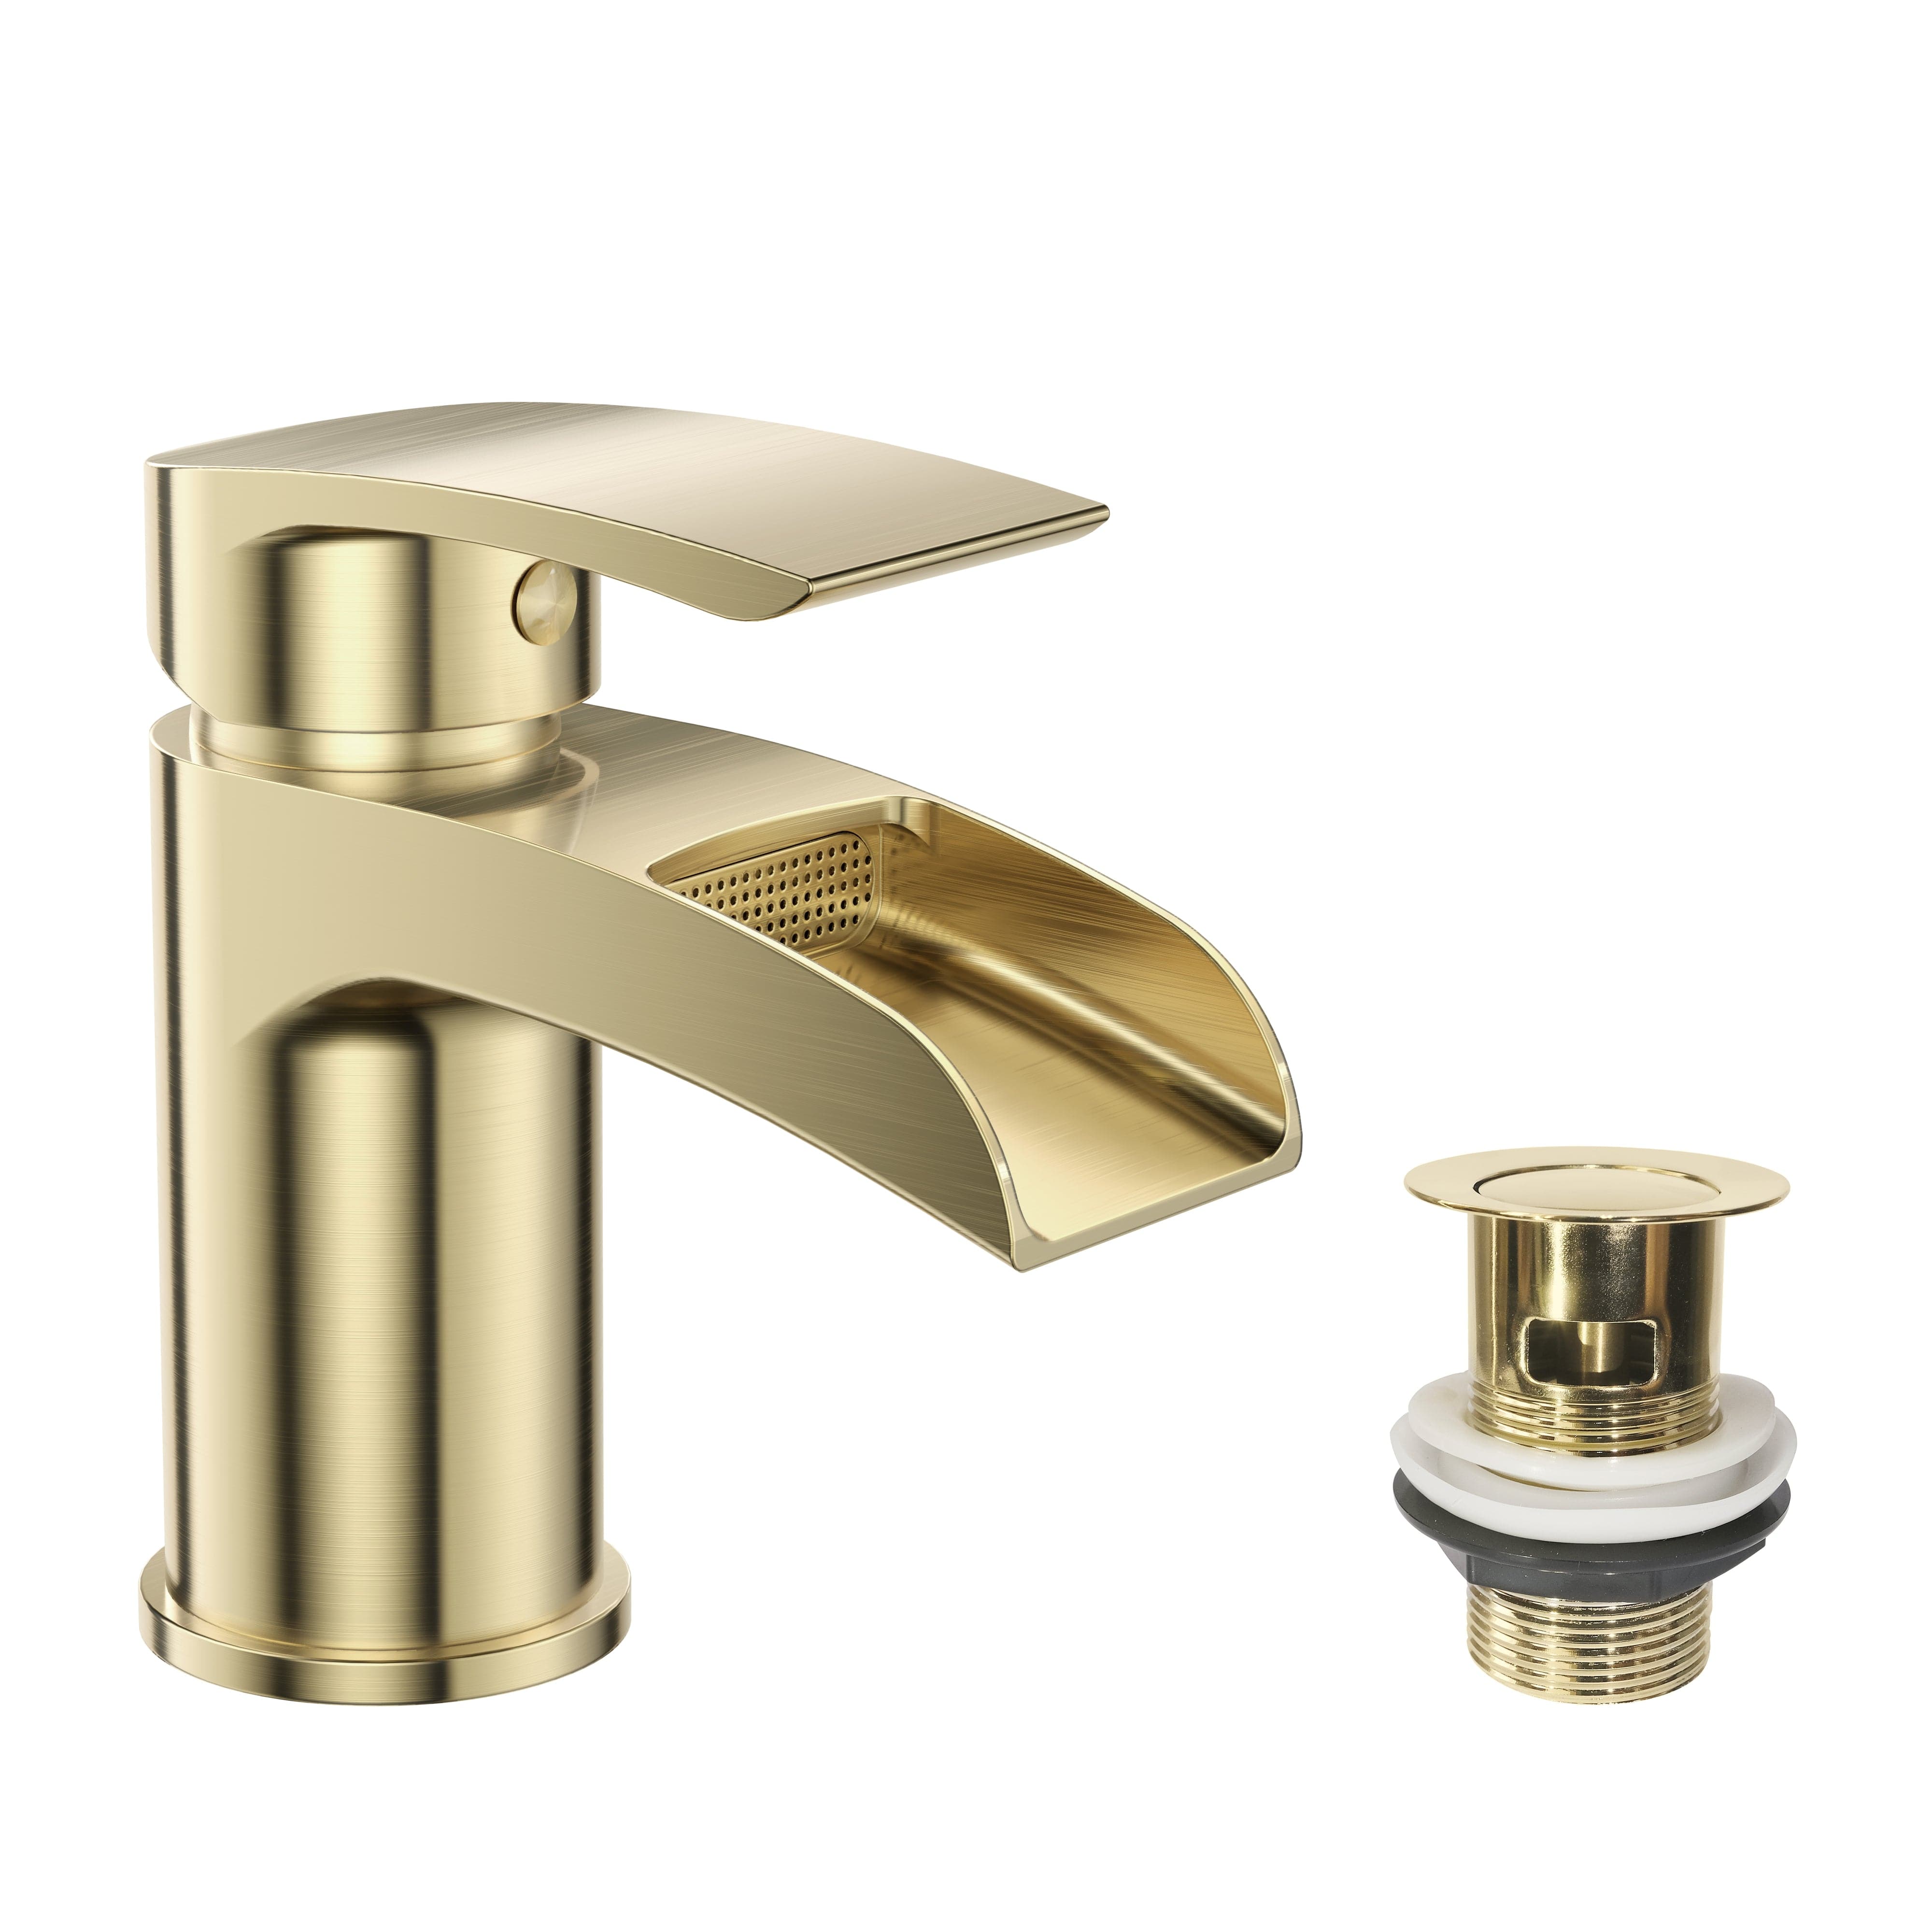 Symphony Round Waterfall Mono Basin Mixer Tap with Waste in Brushed Brass finish, stylish bathroom essential. Buy now for modern UK homes.